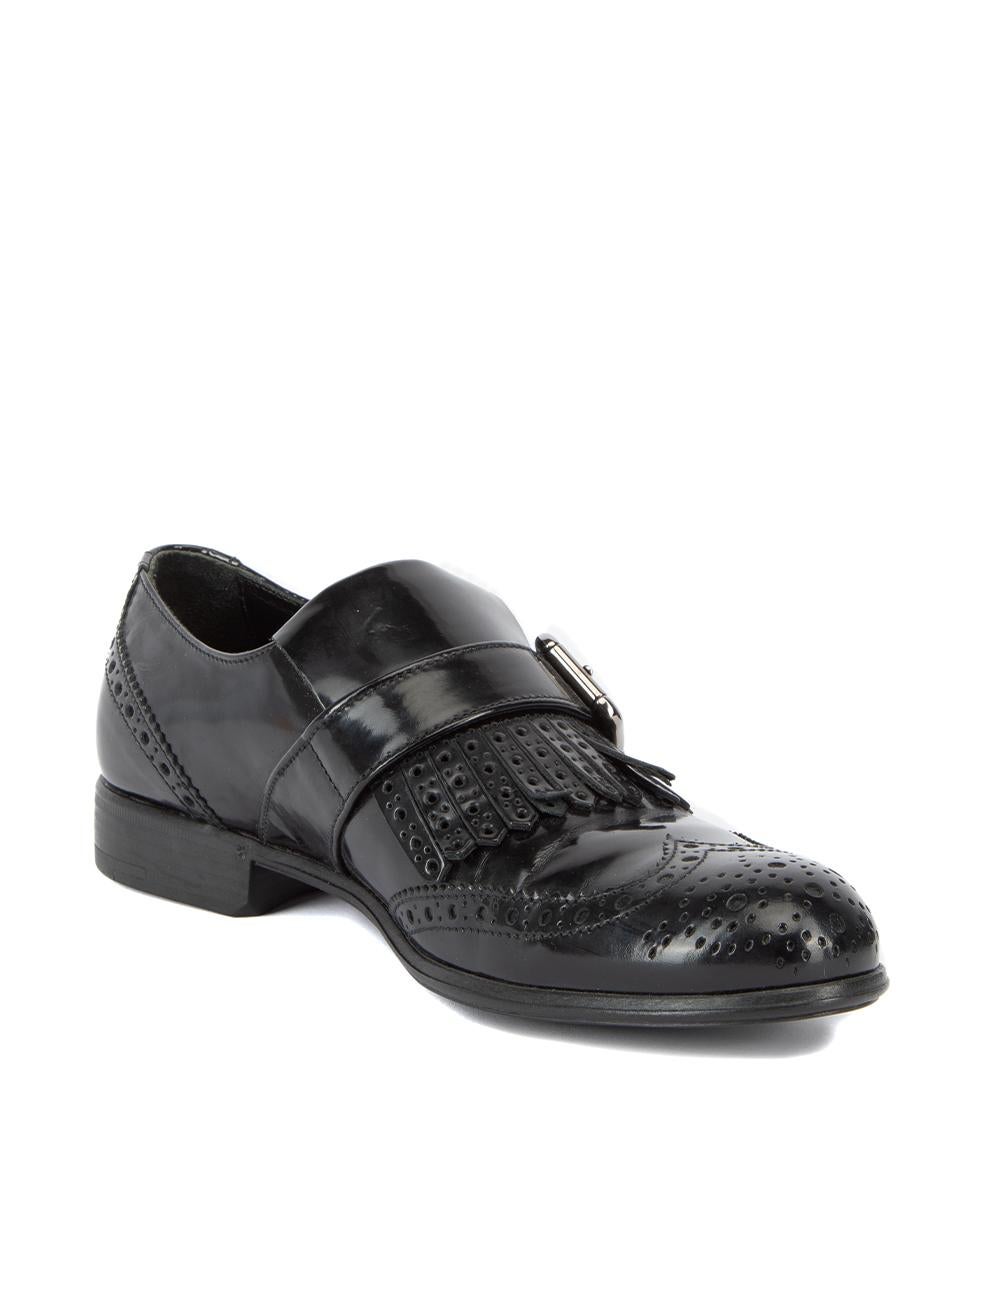 CONDITION is Very good. Hardly any visible wear is evident on this used Dolce & Gabbana designer resale item. Details Black Patent leather Round toe Brogue design Buckle closure Low heel Made in Italy Composition Exterior: Patent leather Interior: